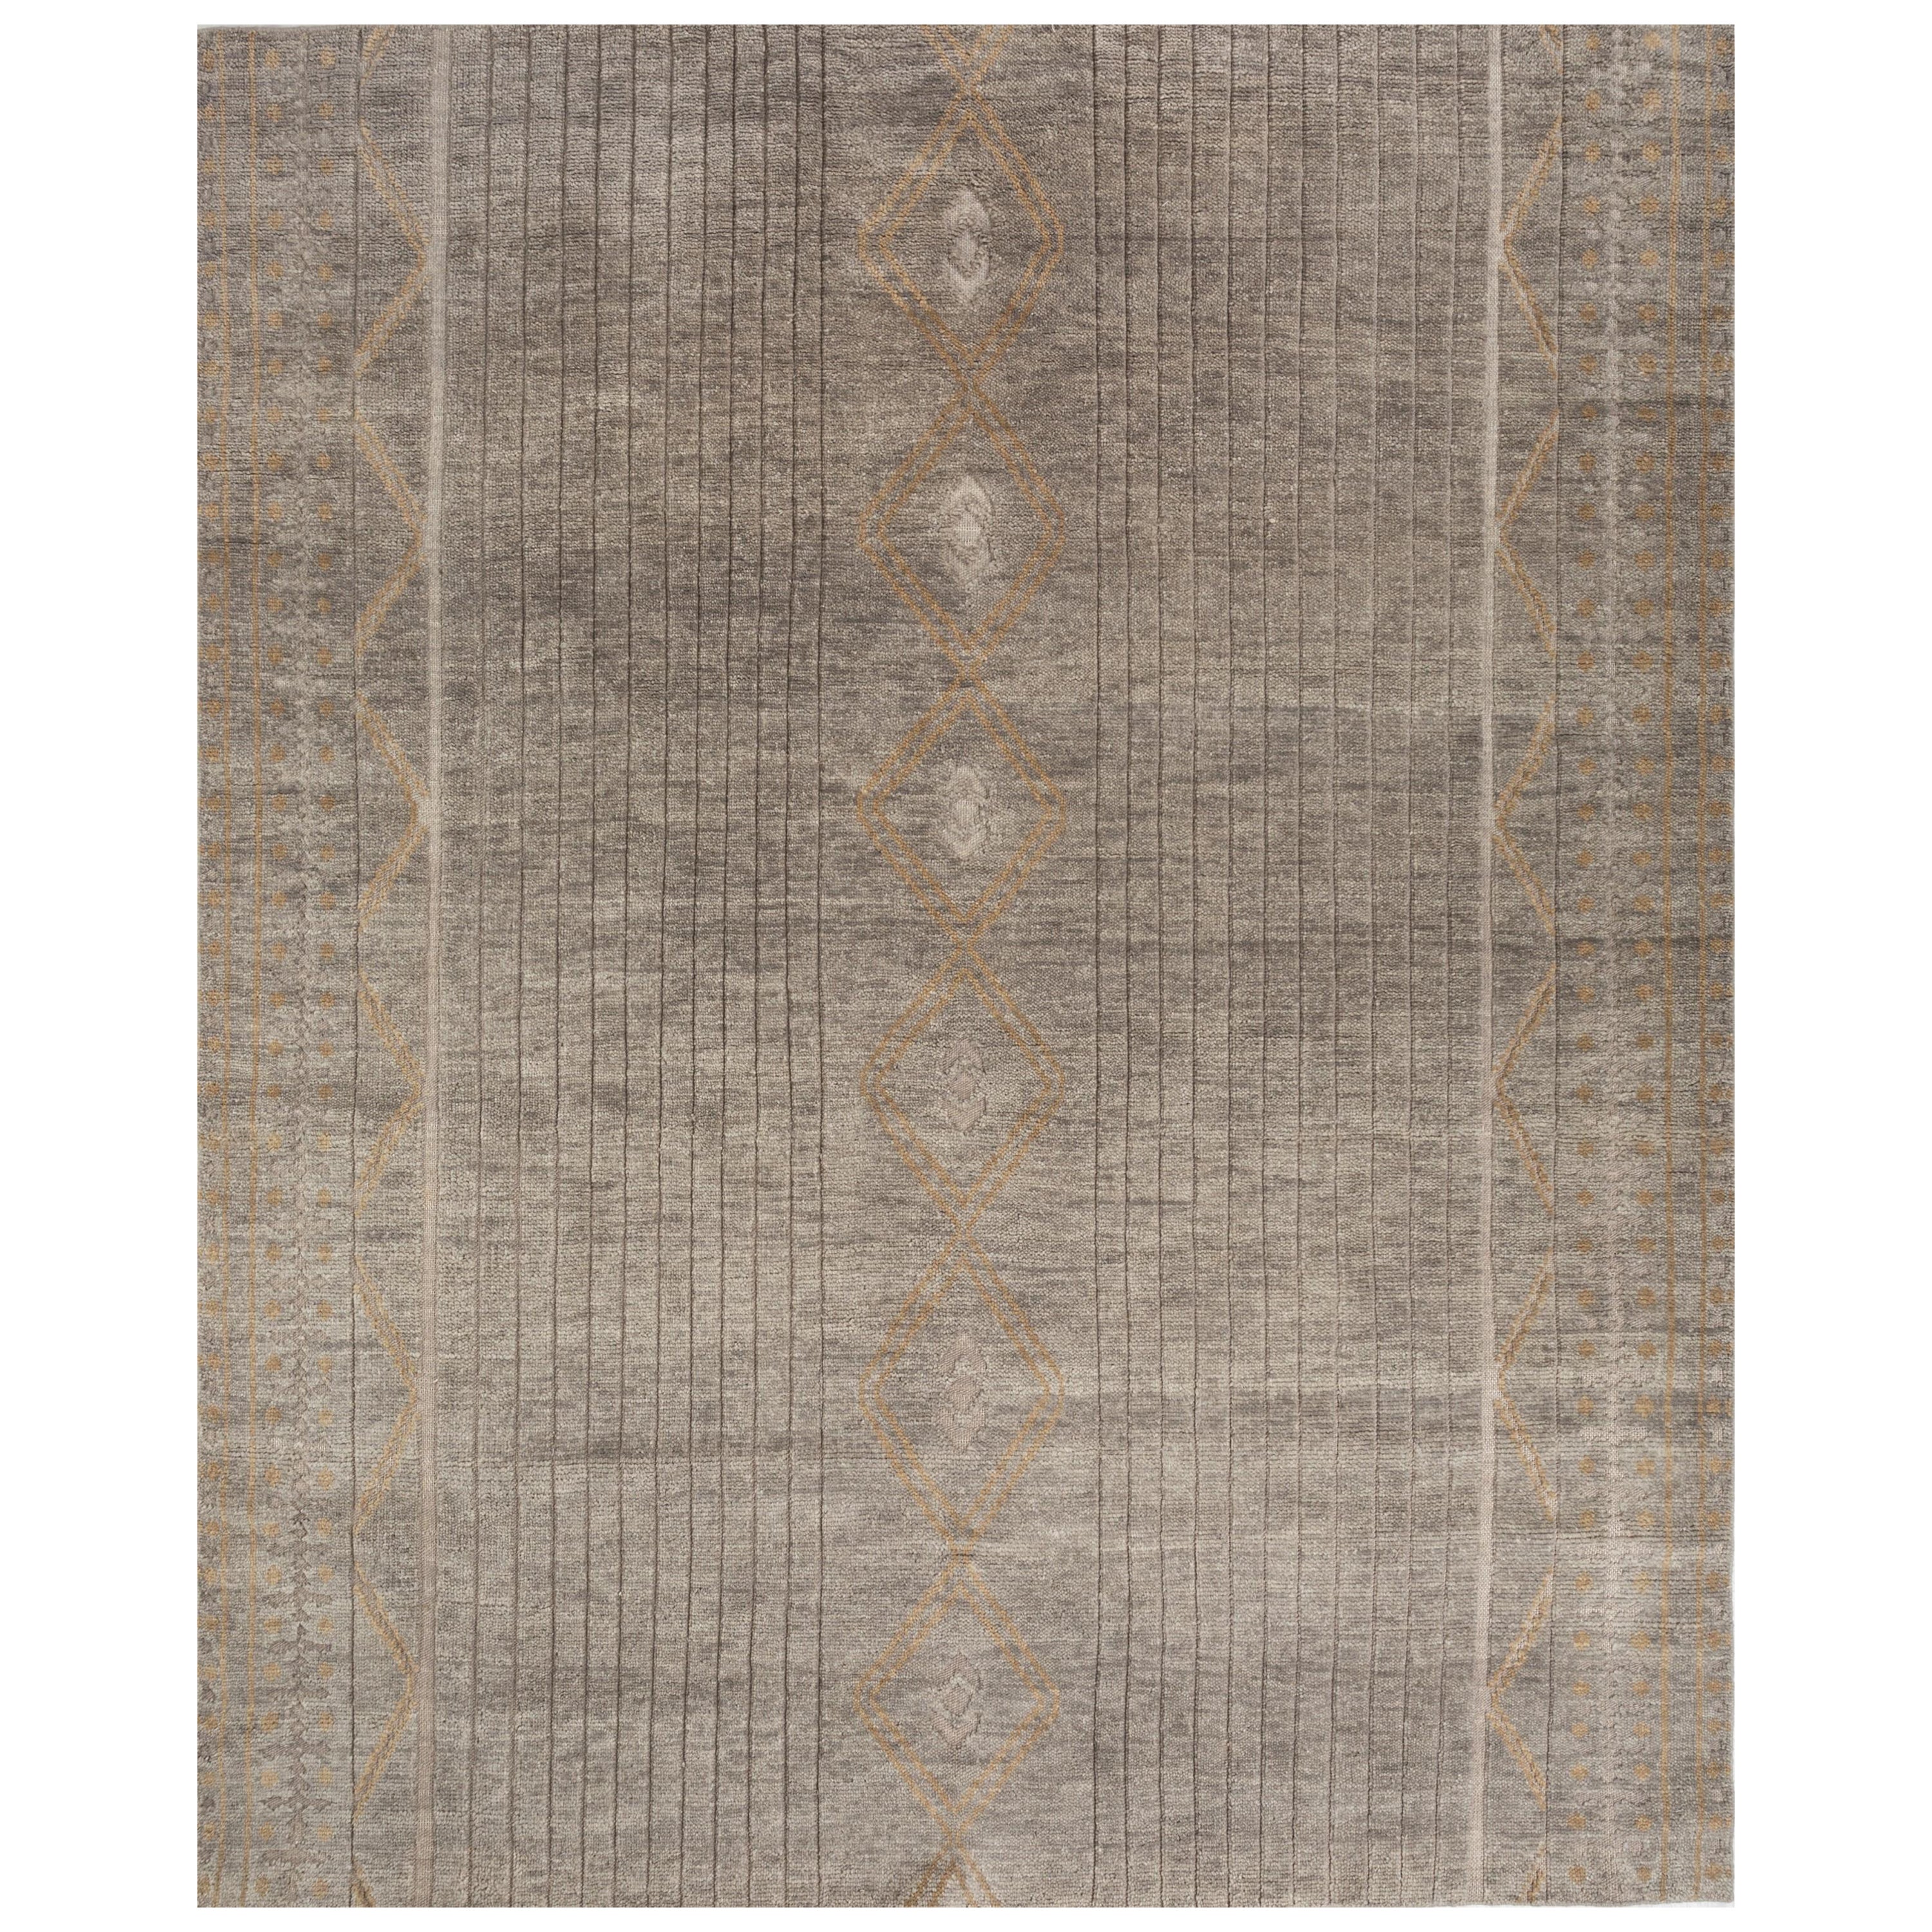 Sublime Simplicity Medium gray & Nickel 240x300 Cm Handknotted Rug For Sale